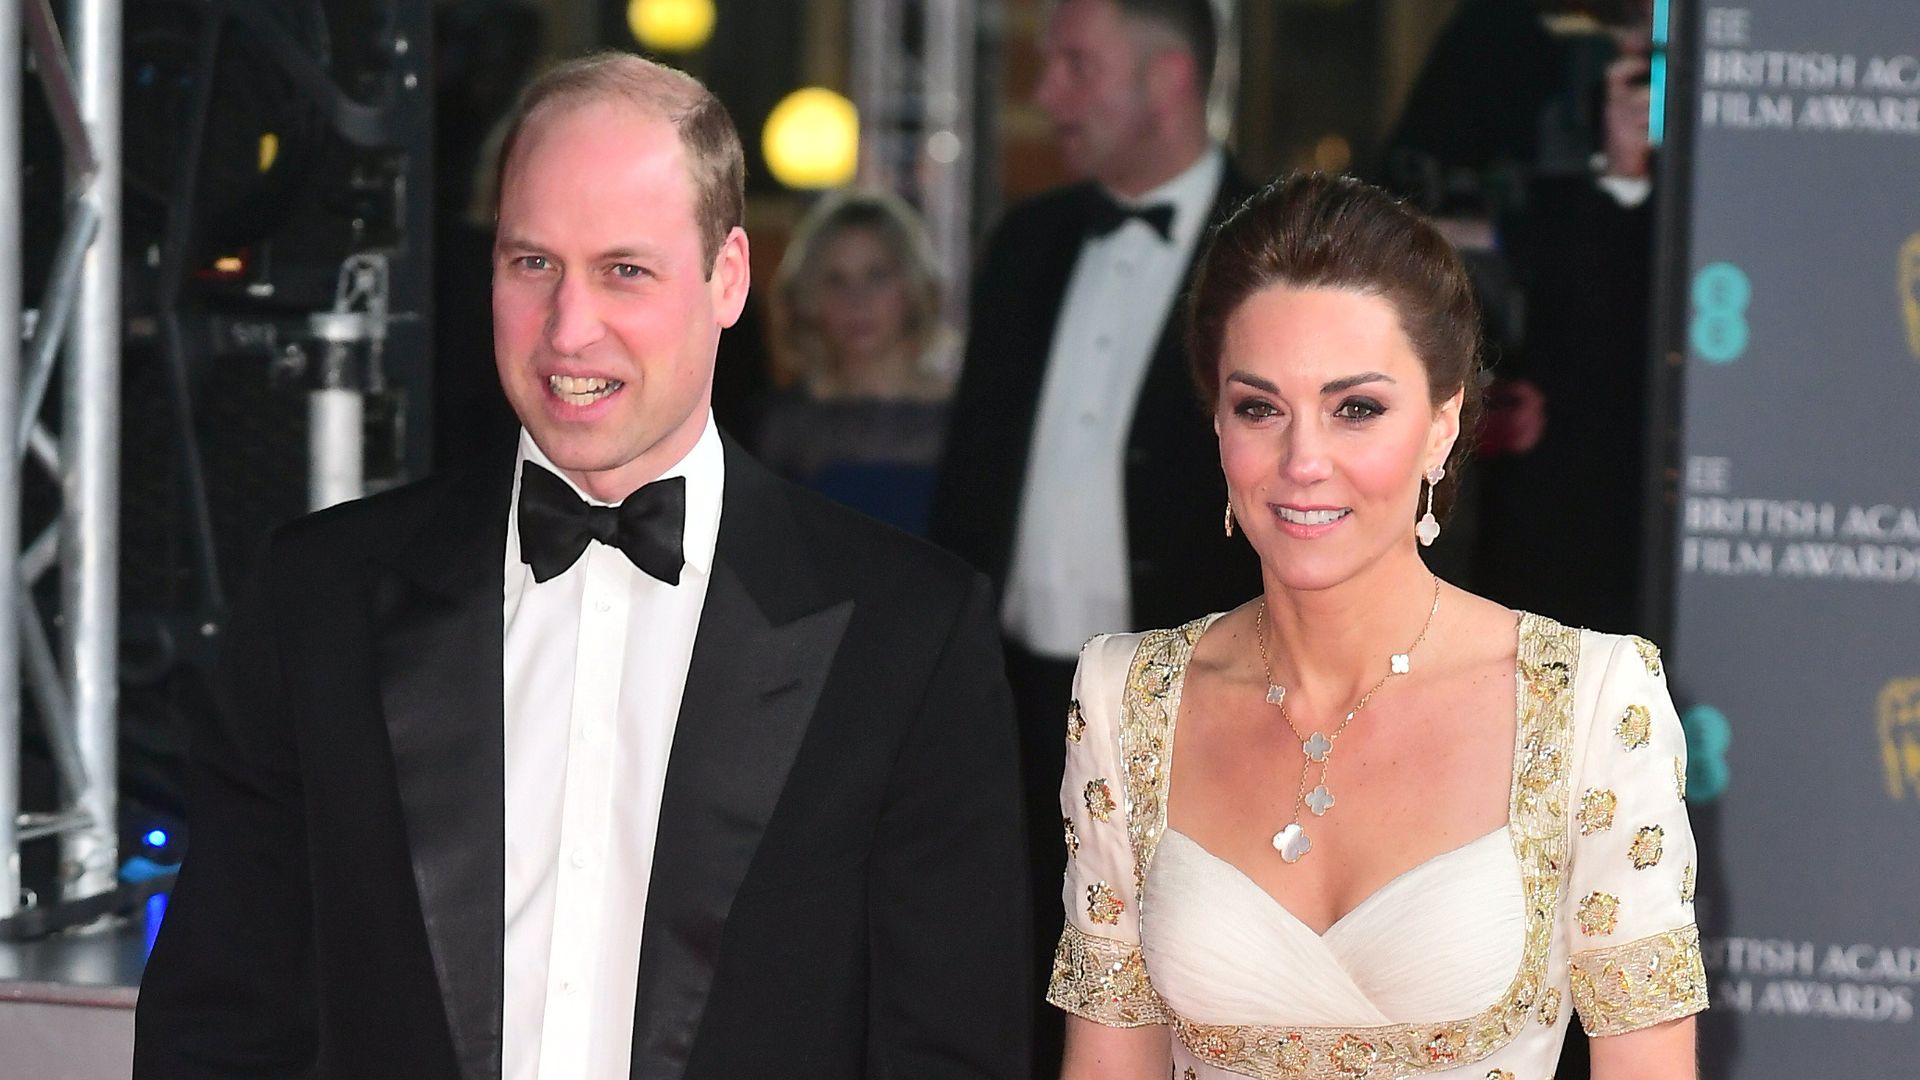 Prince William and Kate attend the EE British Academy Film Awards 2020 at Royal Albert Hall 